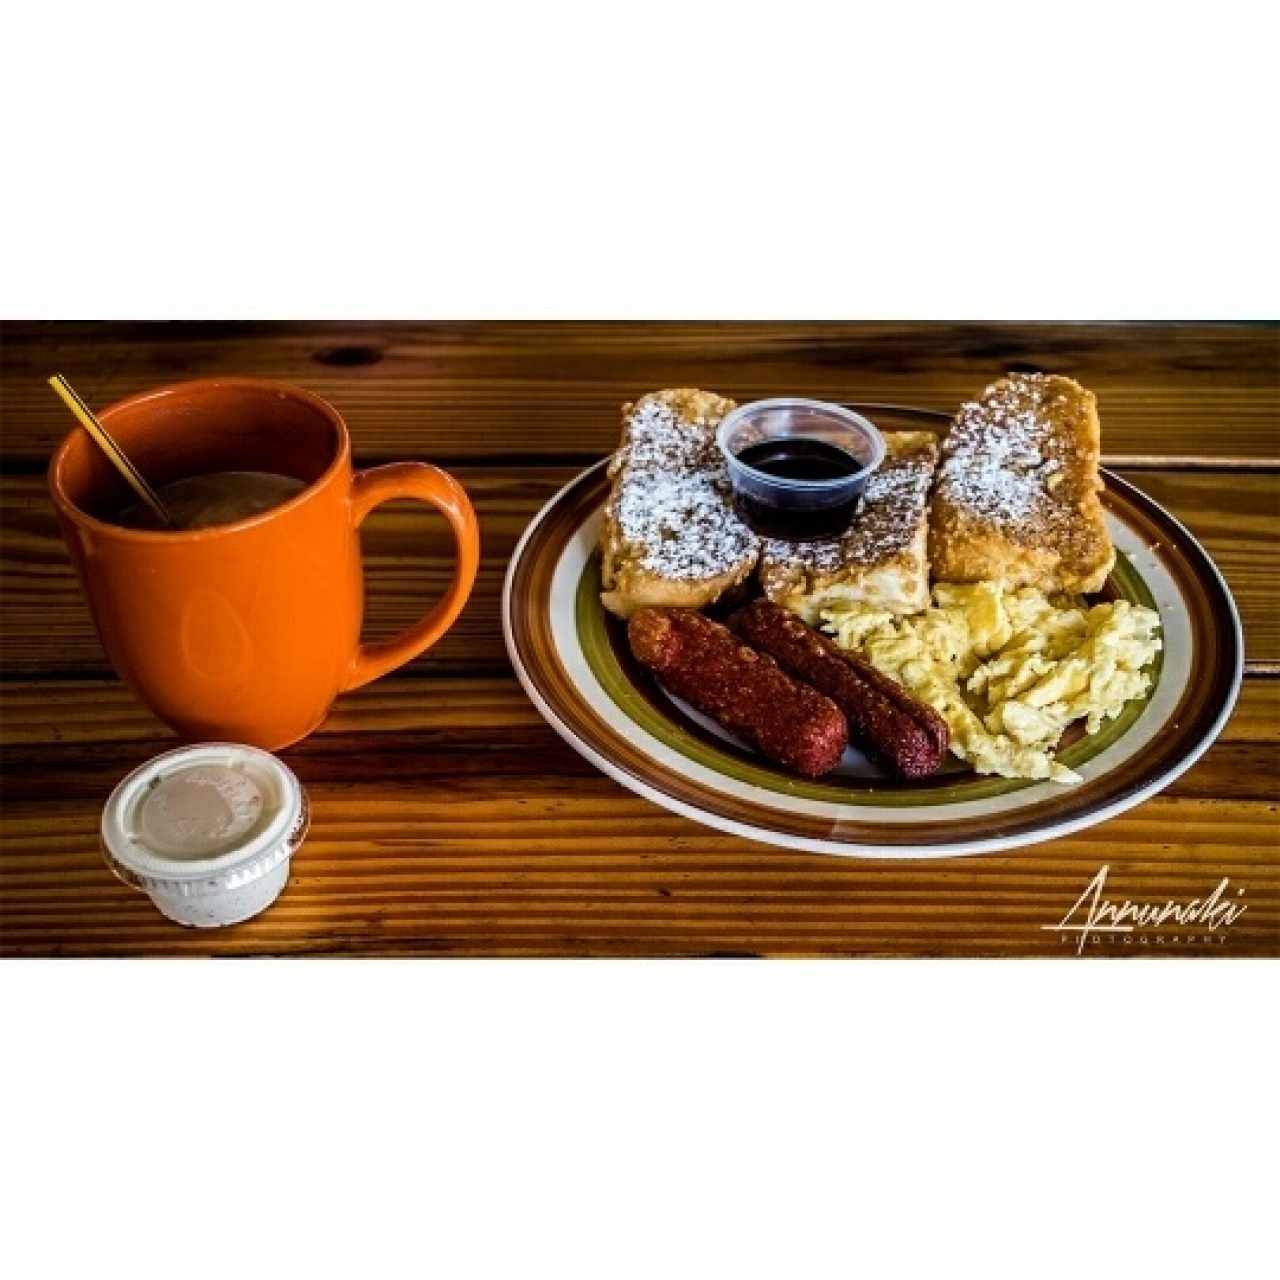 French Toast platter and Hot Chocolate